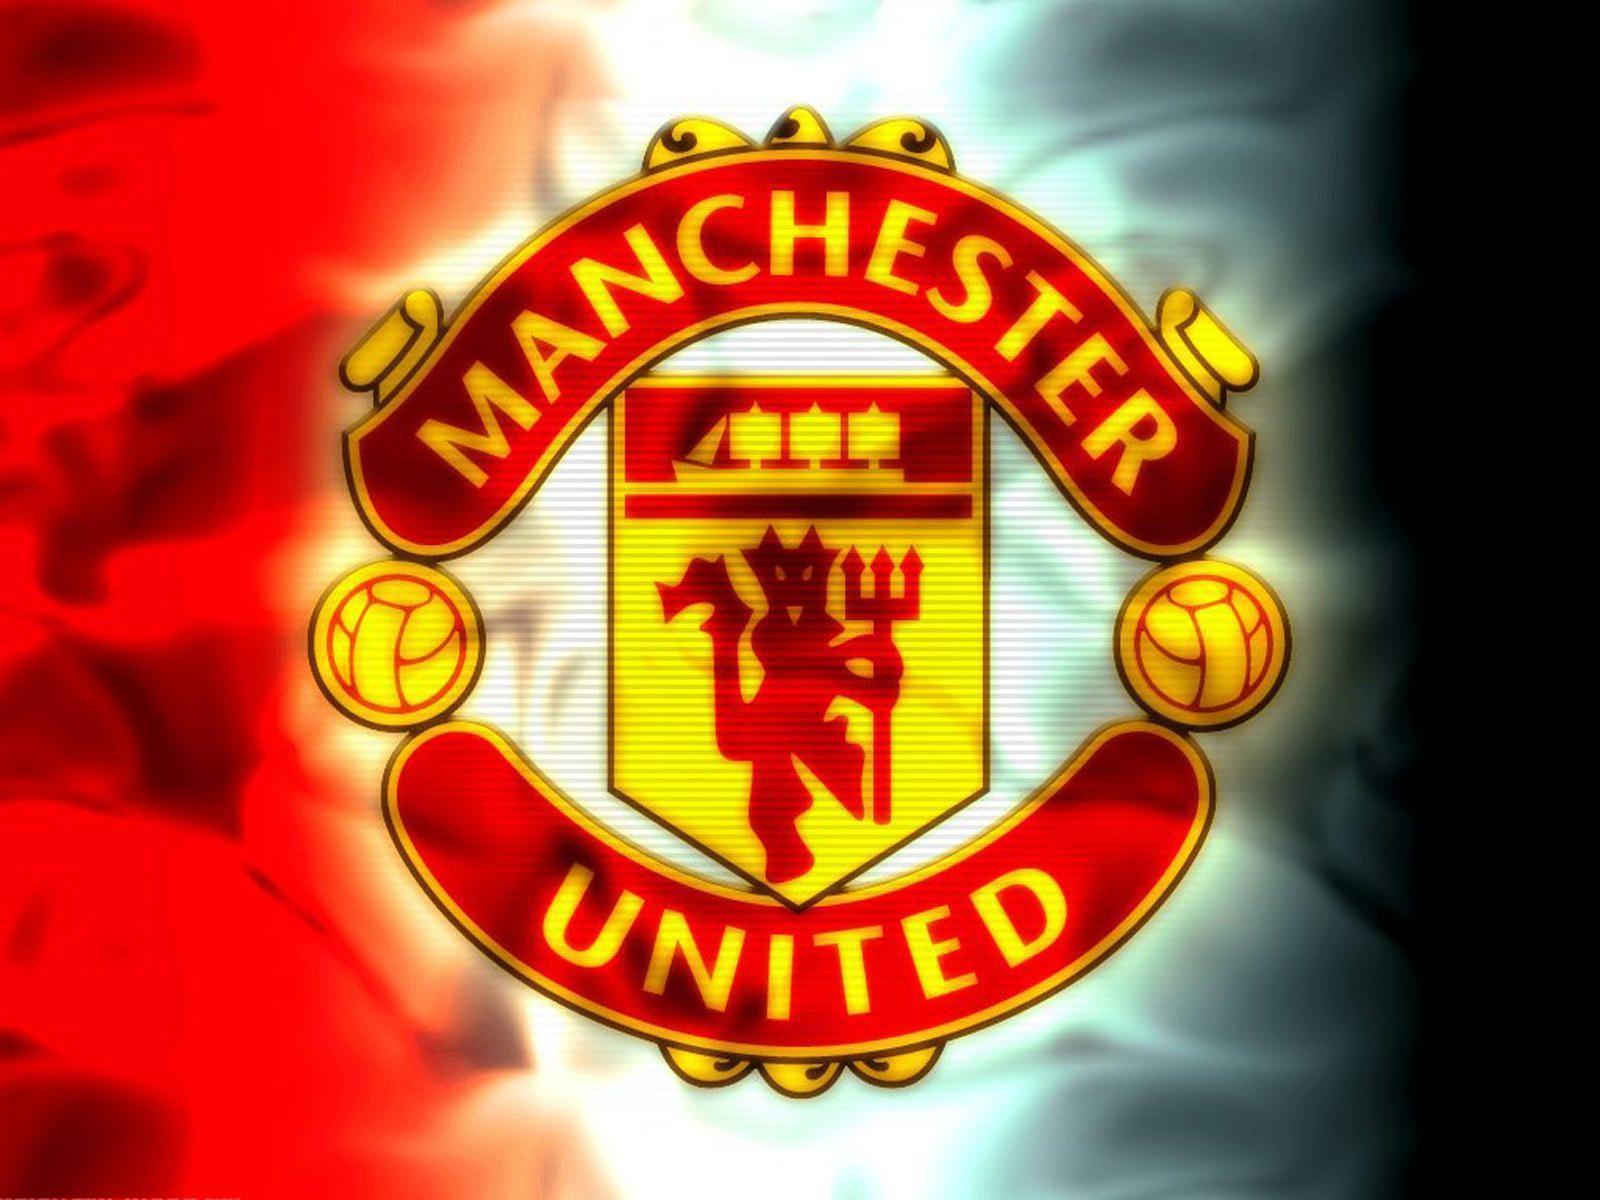 Manchester United 2017 HD Wallpapers - Wallpaper Cave